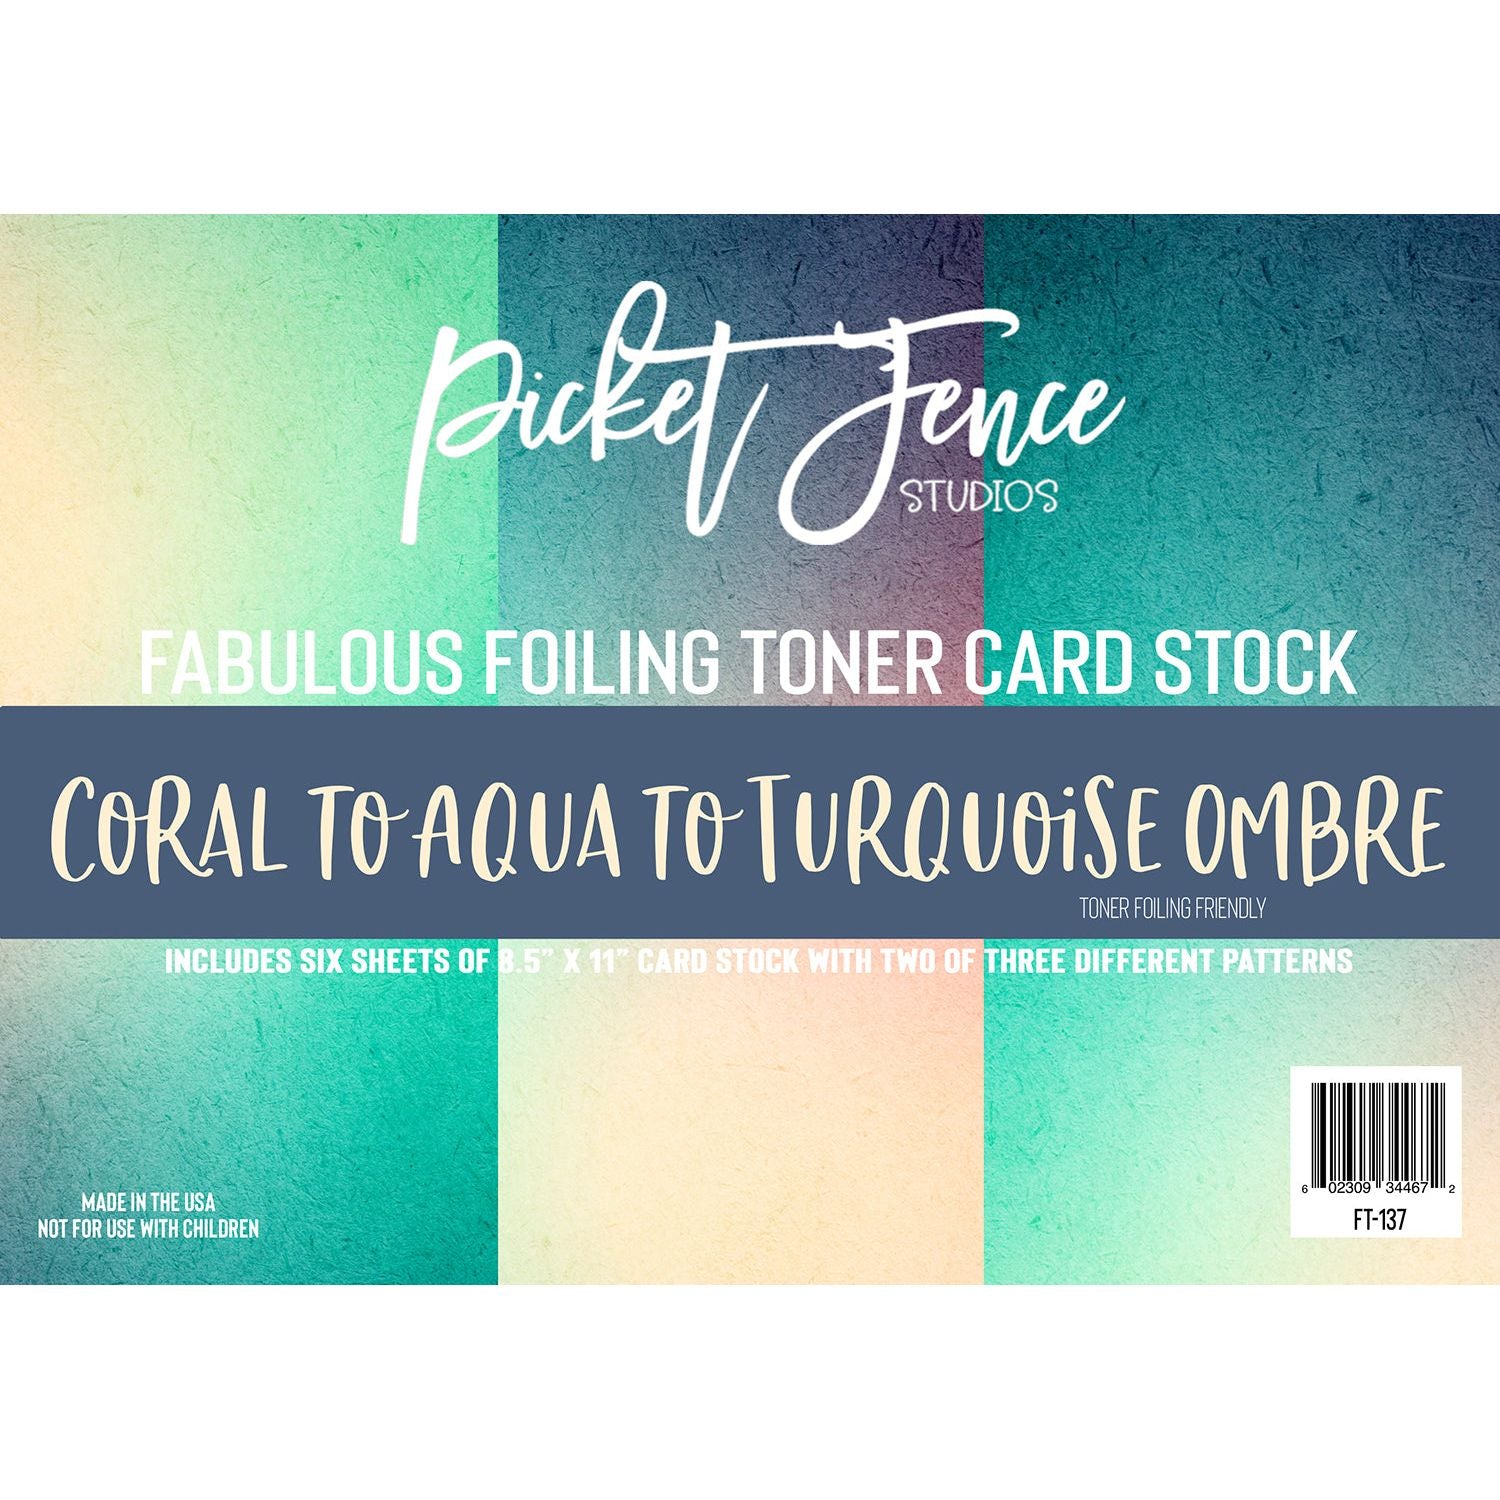 Fabulous Foiling Toner Card Stock - Coral to Aqua to Turquoise Ombre